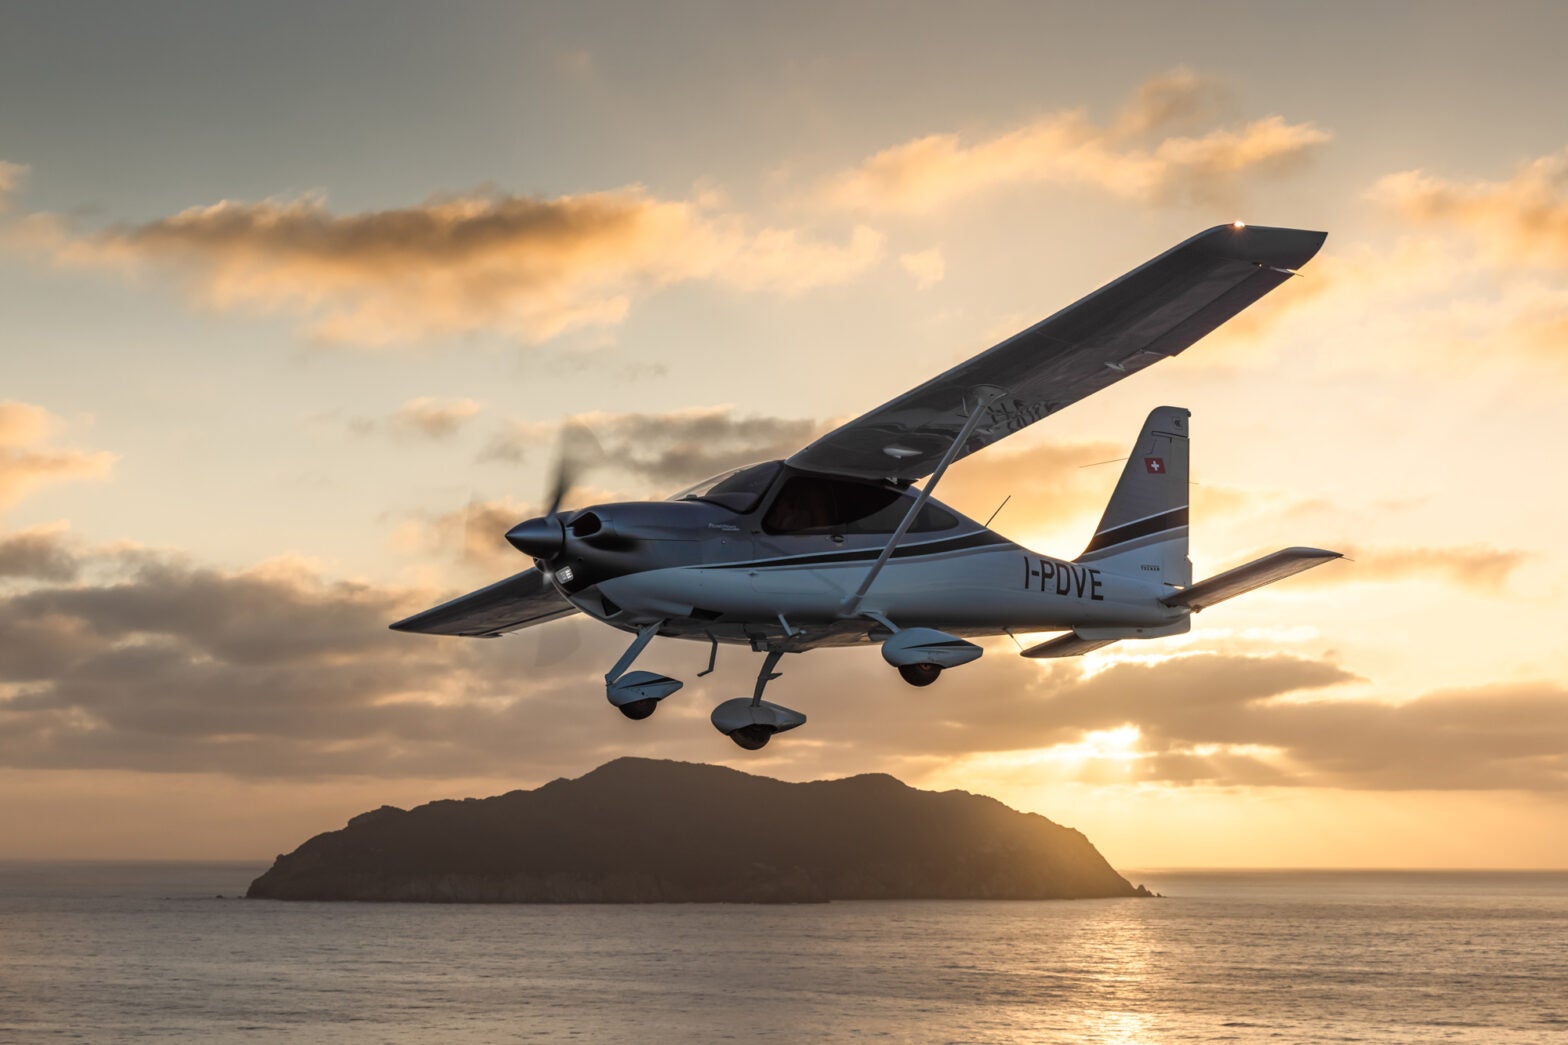 Tecnam Introduces Two New Model Updates at EAA AirVenture